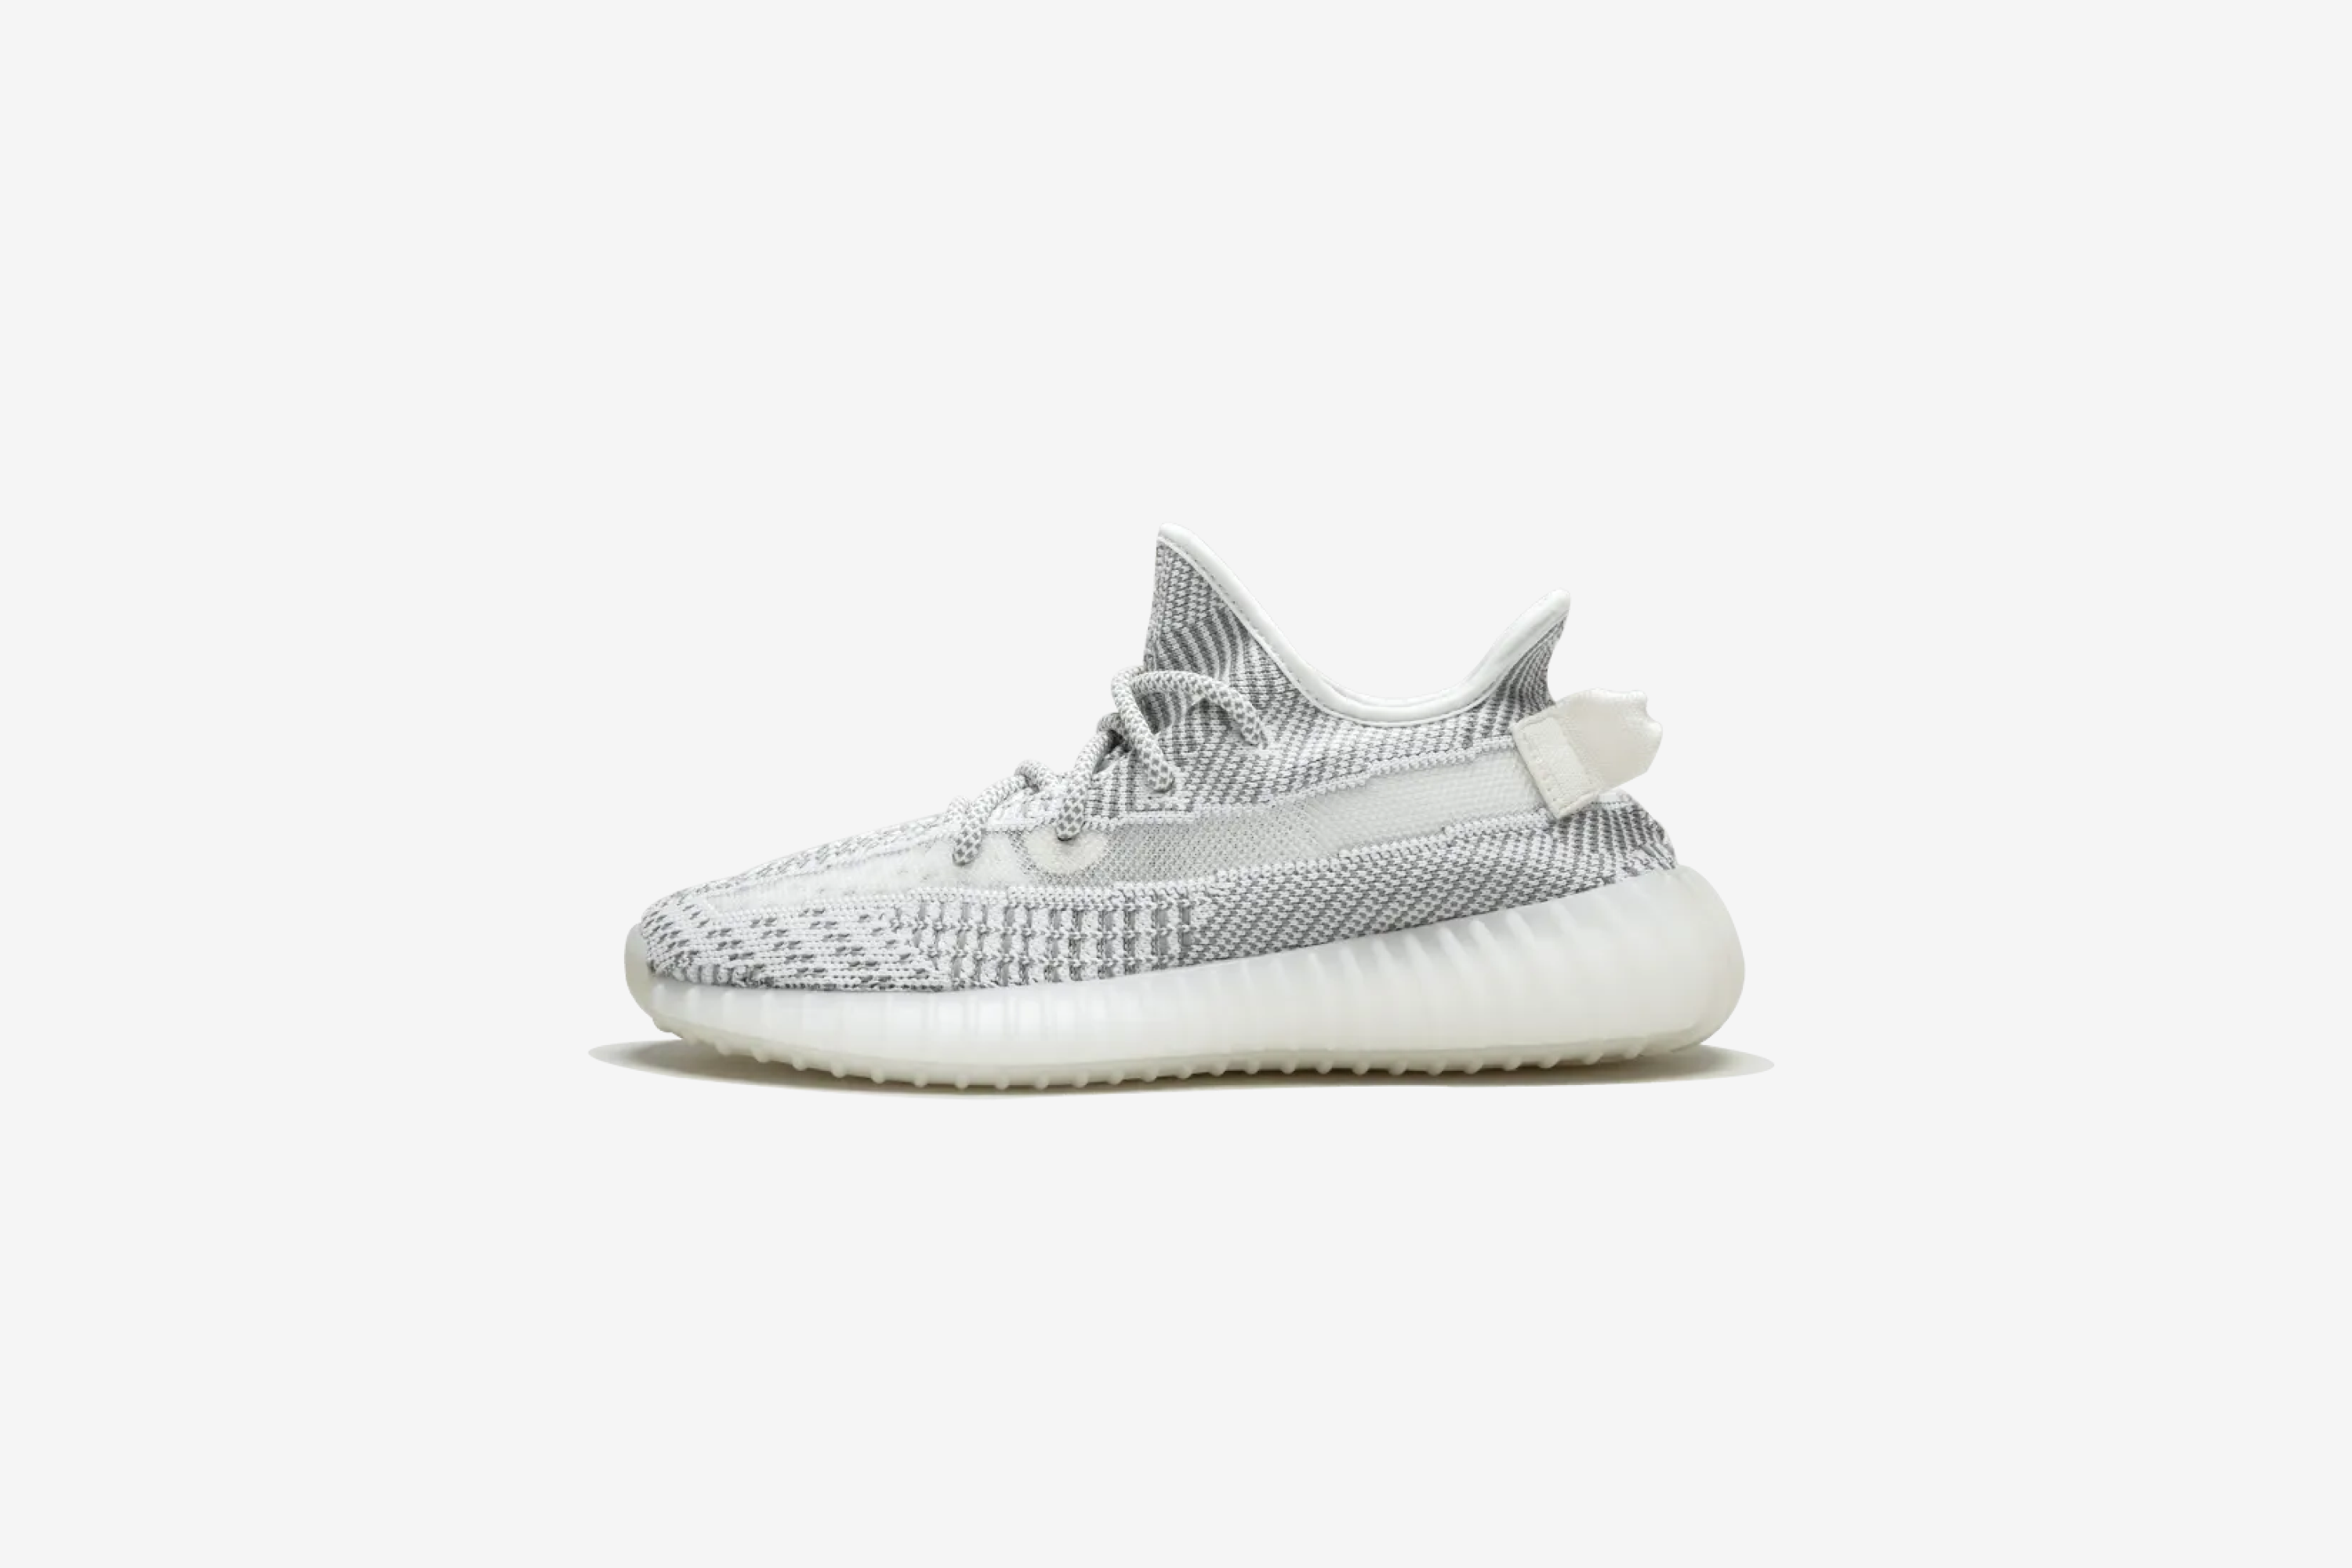 adidas Yeezy Boost 350 V2 'Static Non-Reflective'